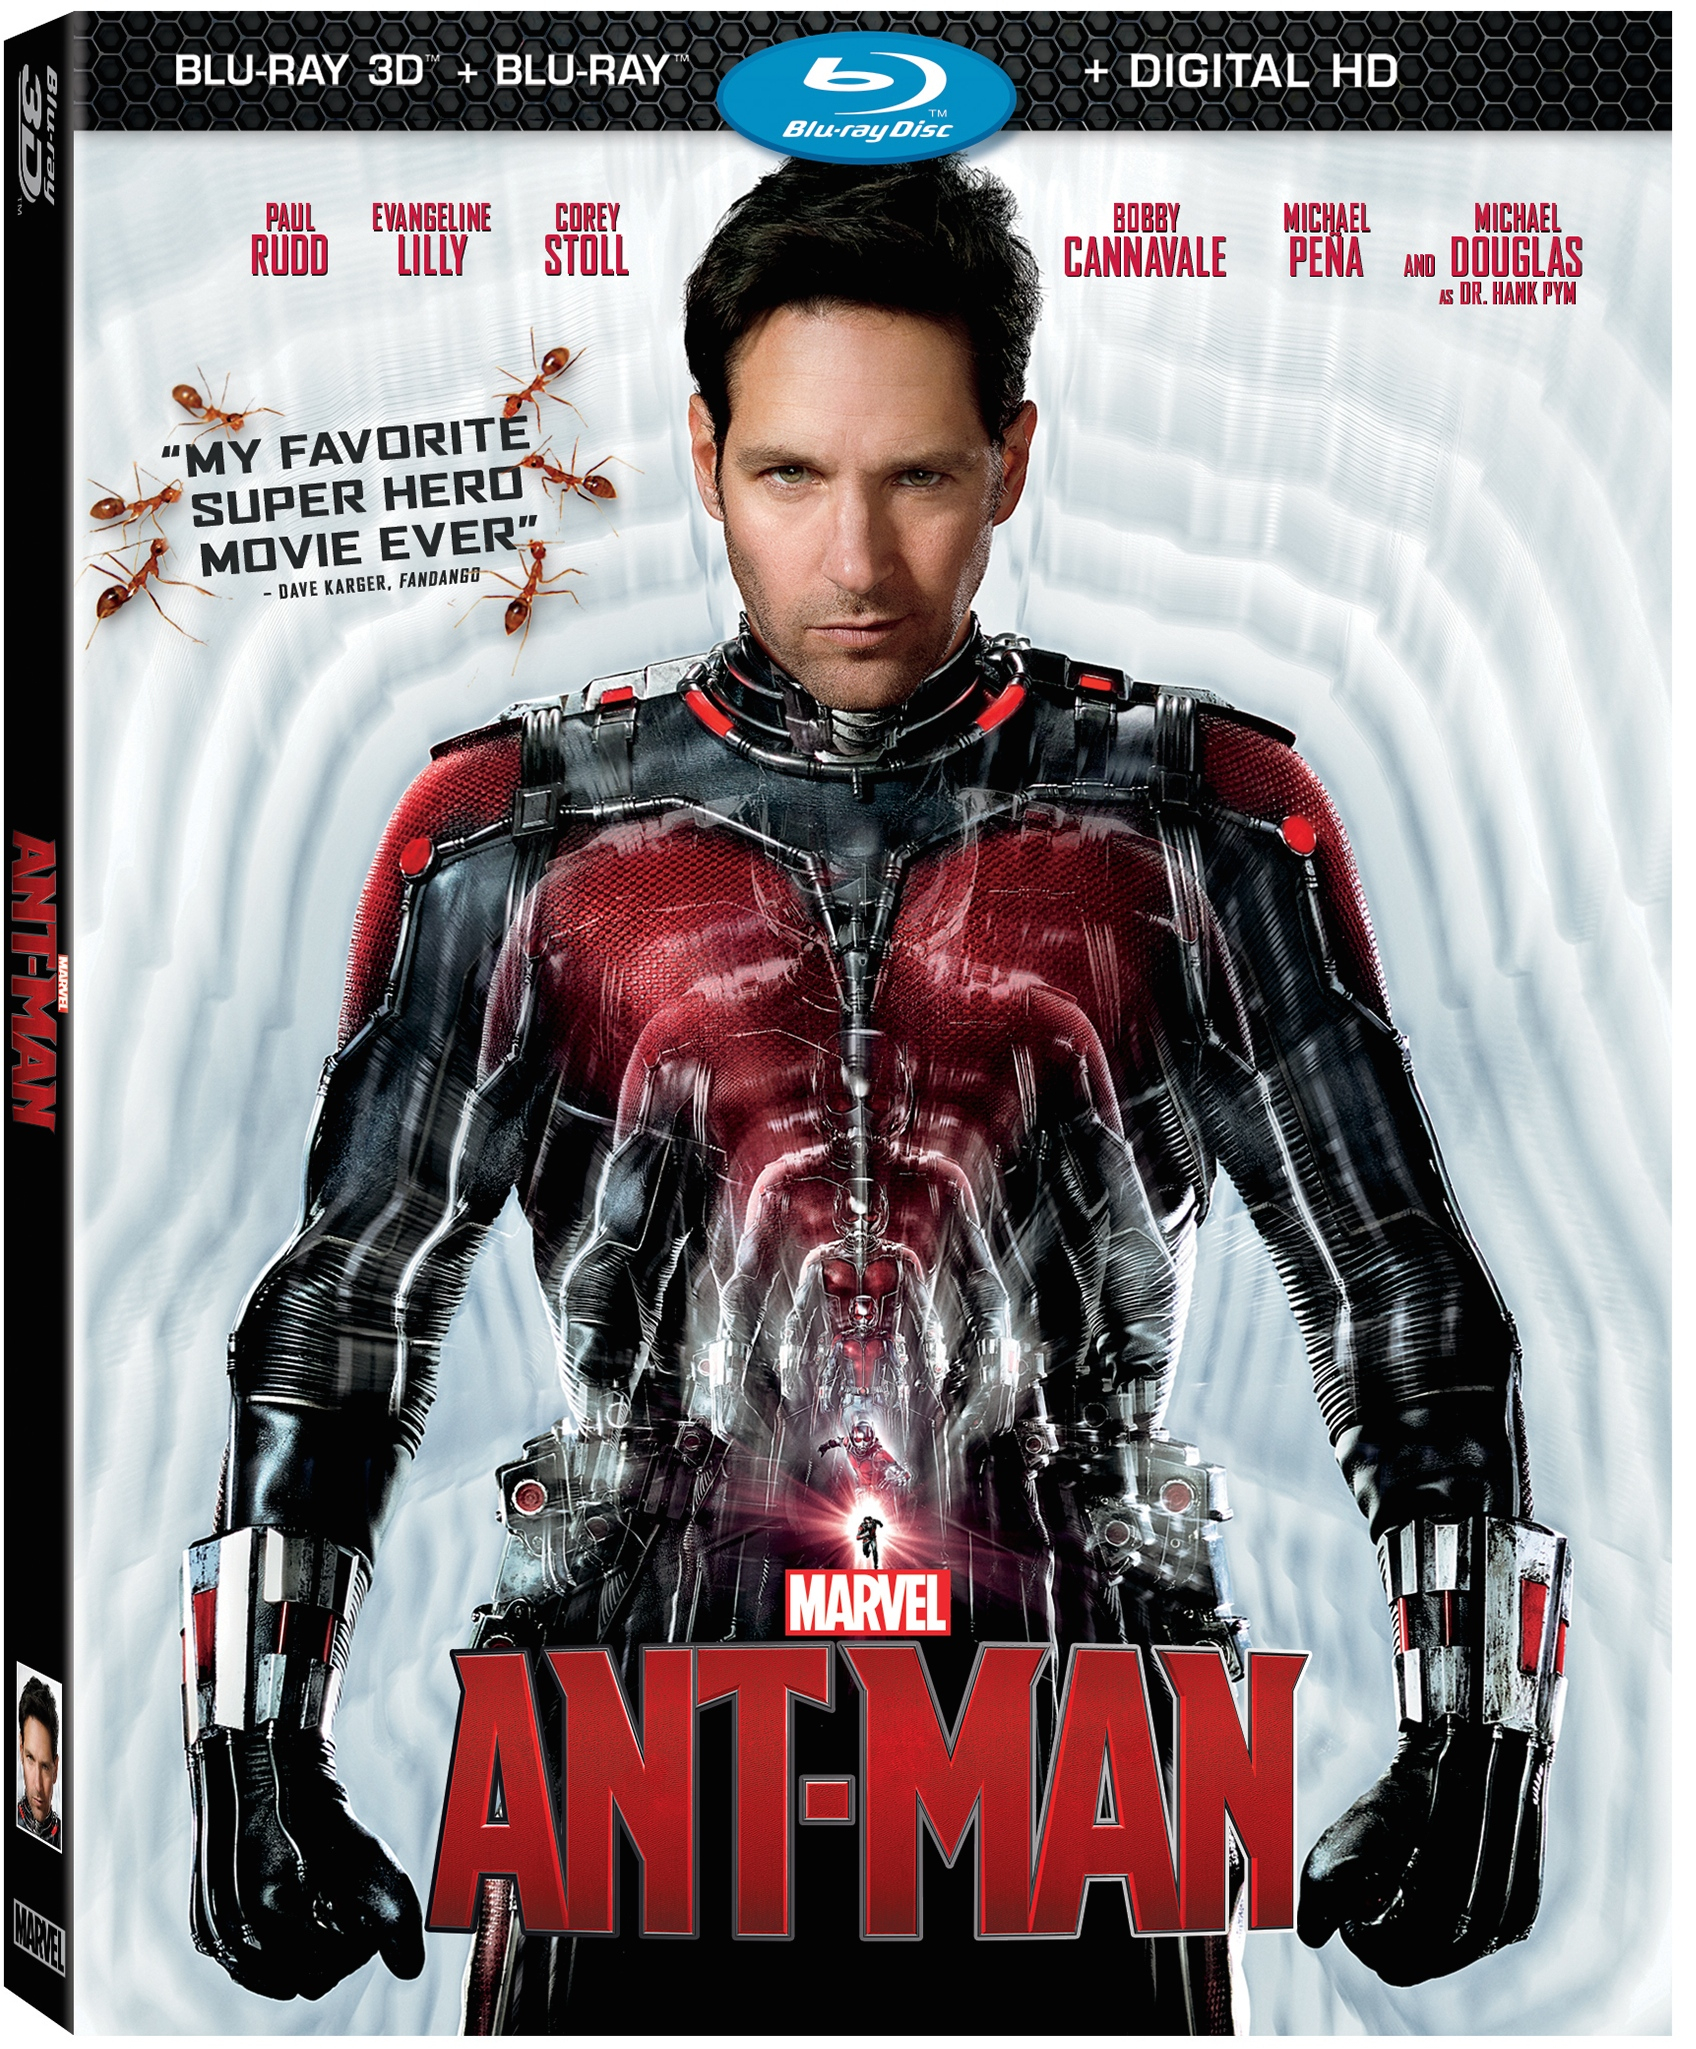 Release dates set for Ant-Man Blu-ray, VOD